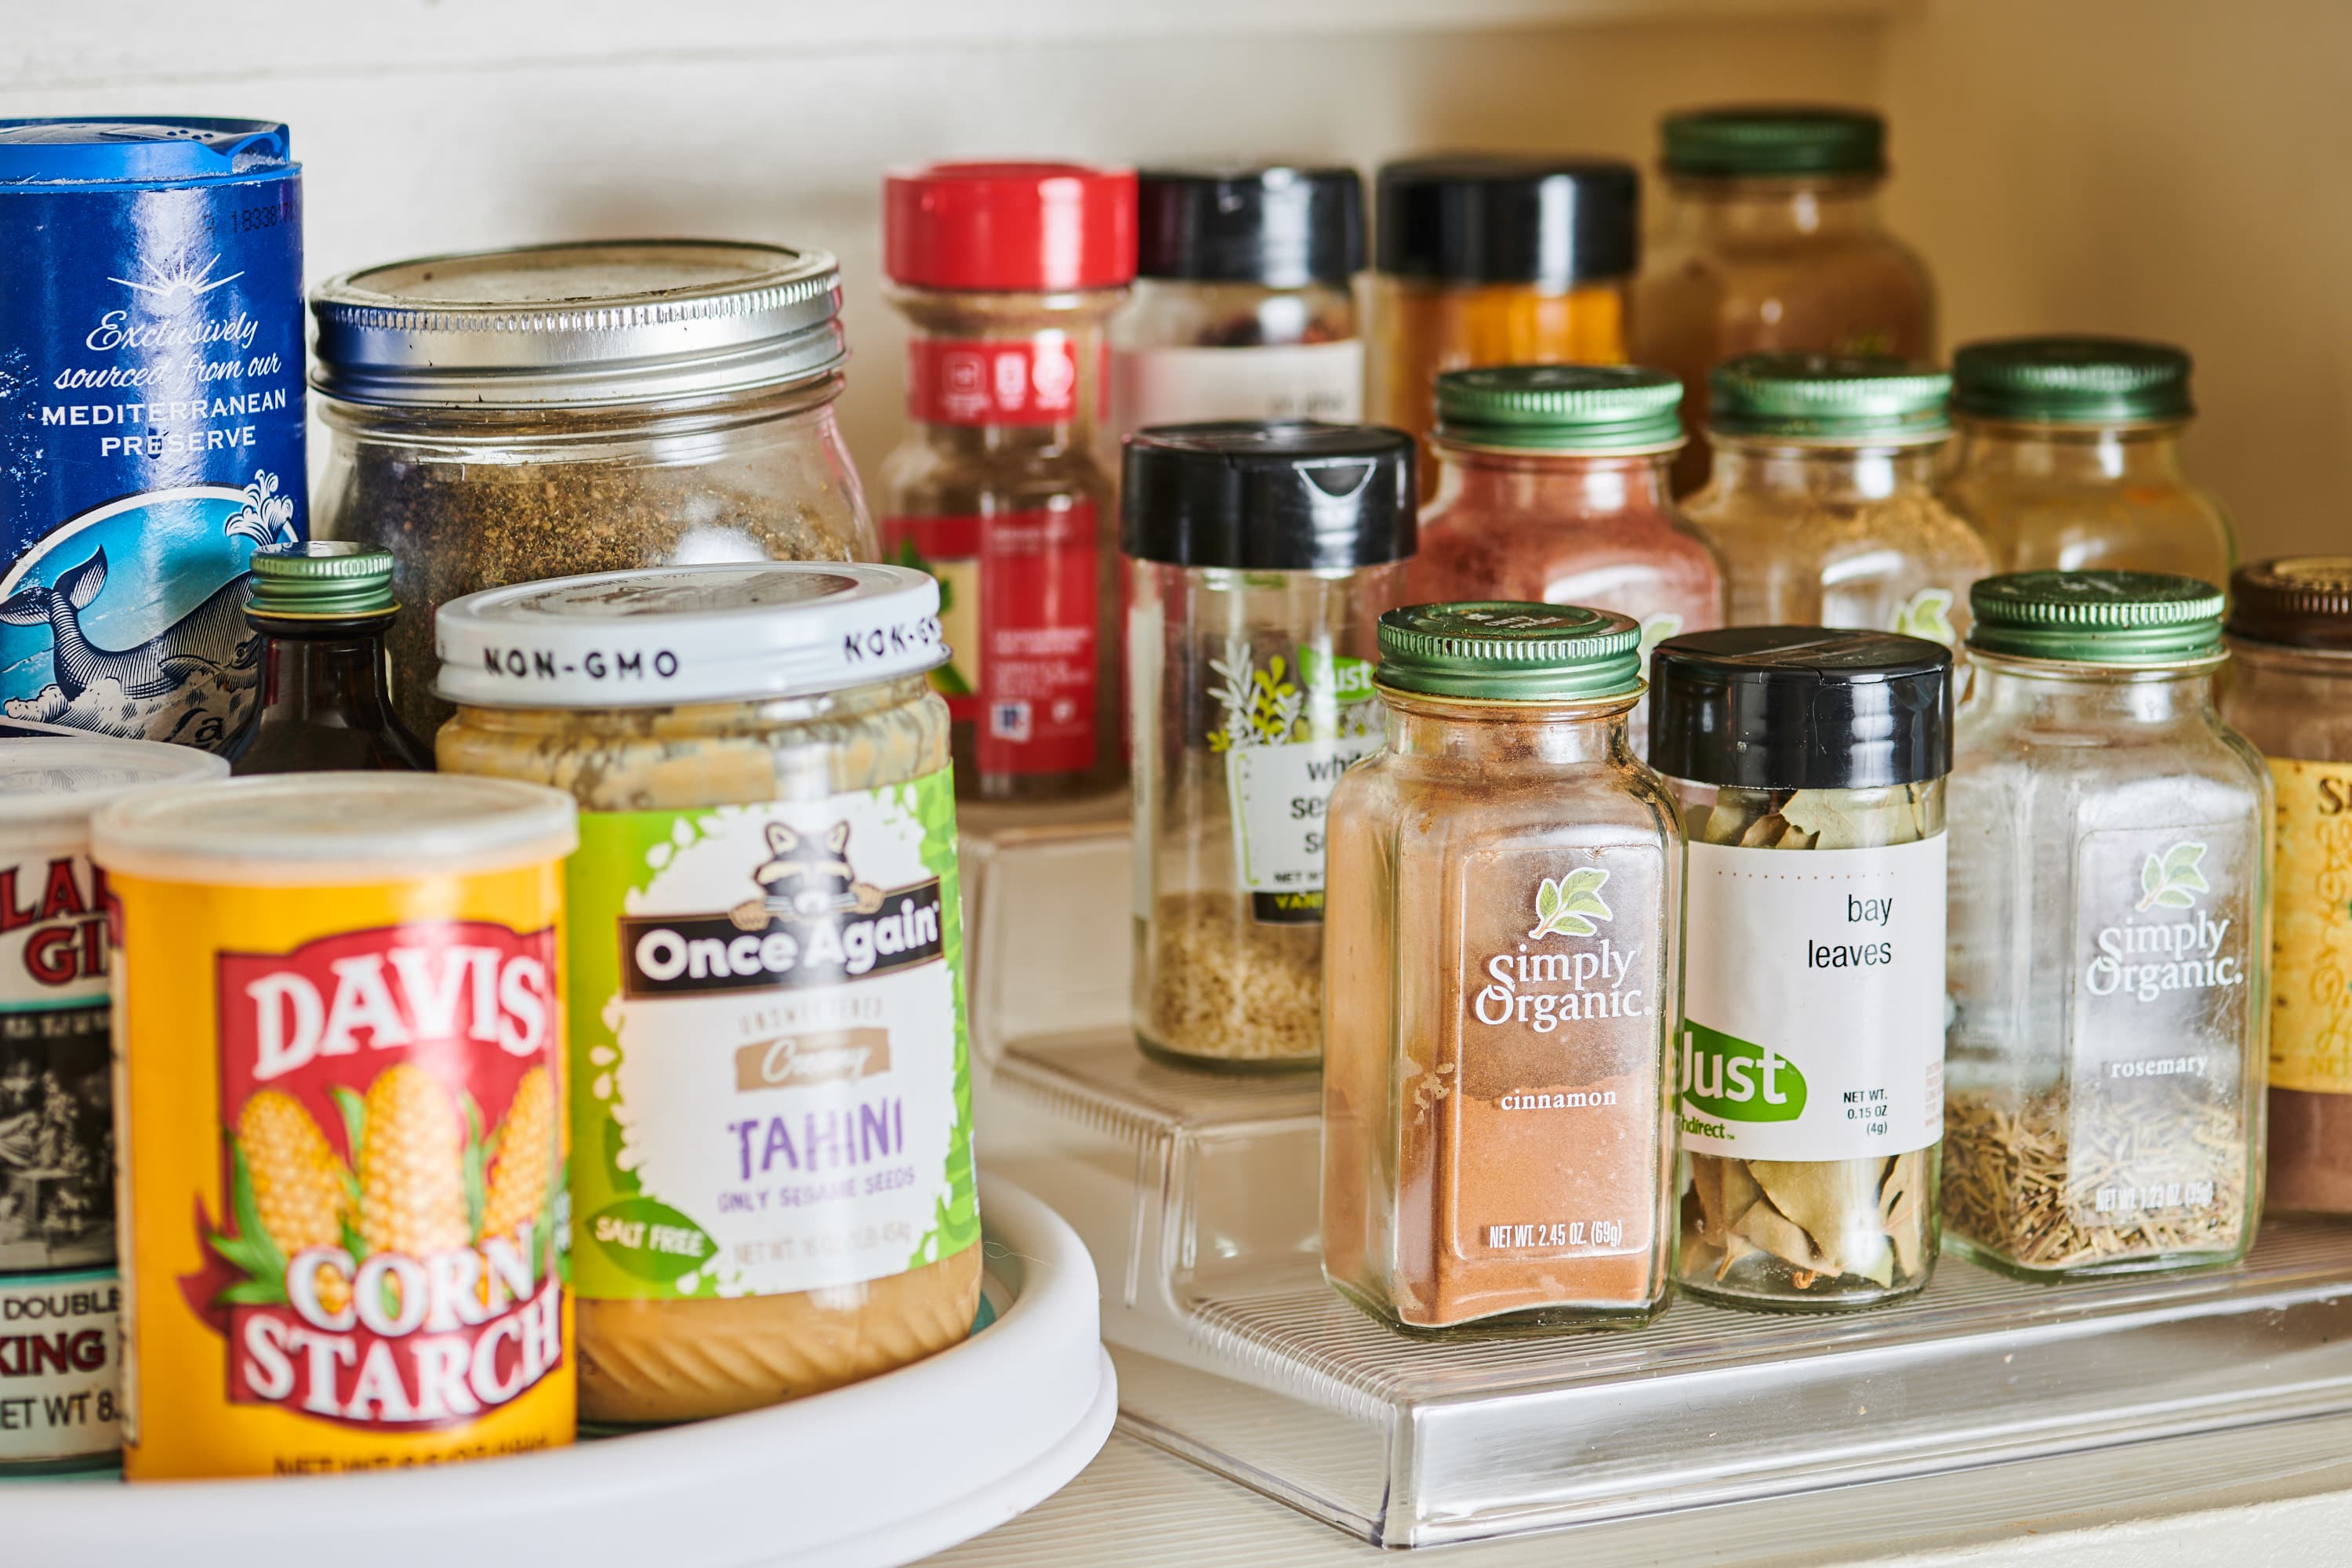 7 of the Very Best Spice Organizing Ideas, According to Spice Shop